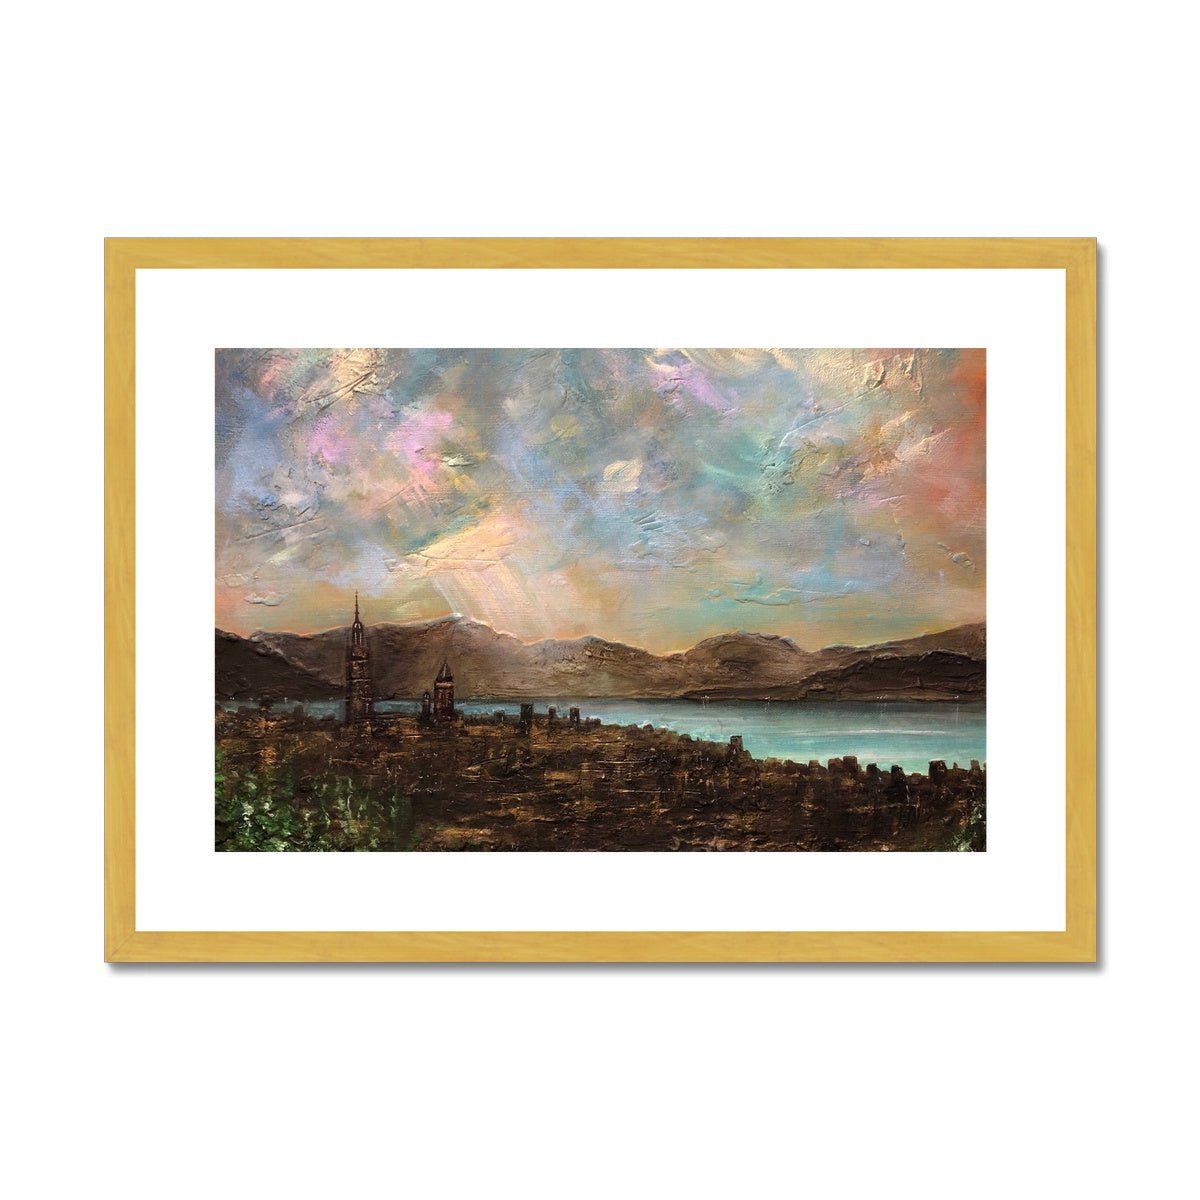 Angels Fingers Over Greenock Painting | Antique Framed & Mounted Prints From Scotland-Antique Framed & Mounted Prints-River Clyde Art Gallery-A2 Landscape-Gold Frame-Paintings, Prints, Homeware, Art Gifts From Scotland By Scottish Artist Kevin Hunter